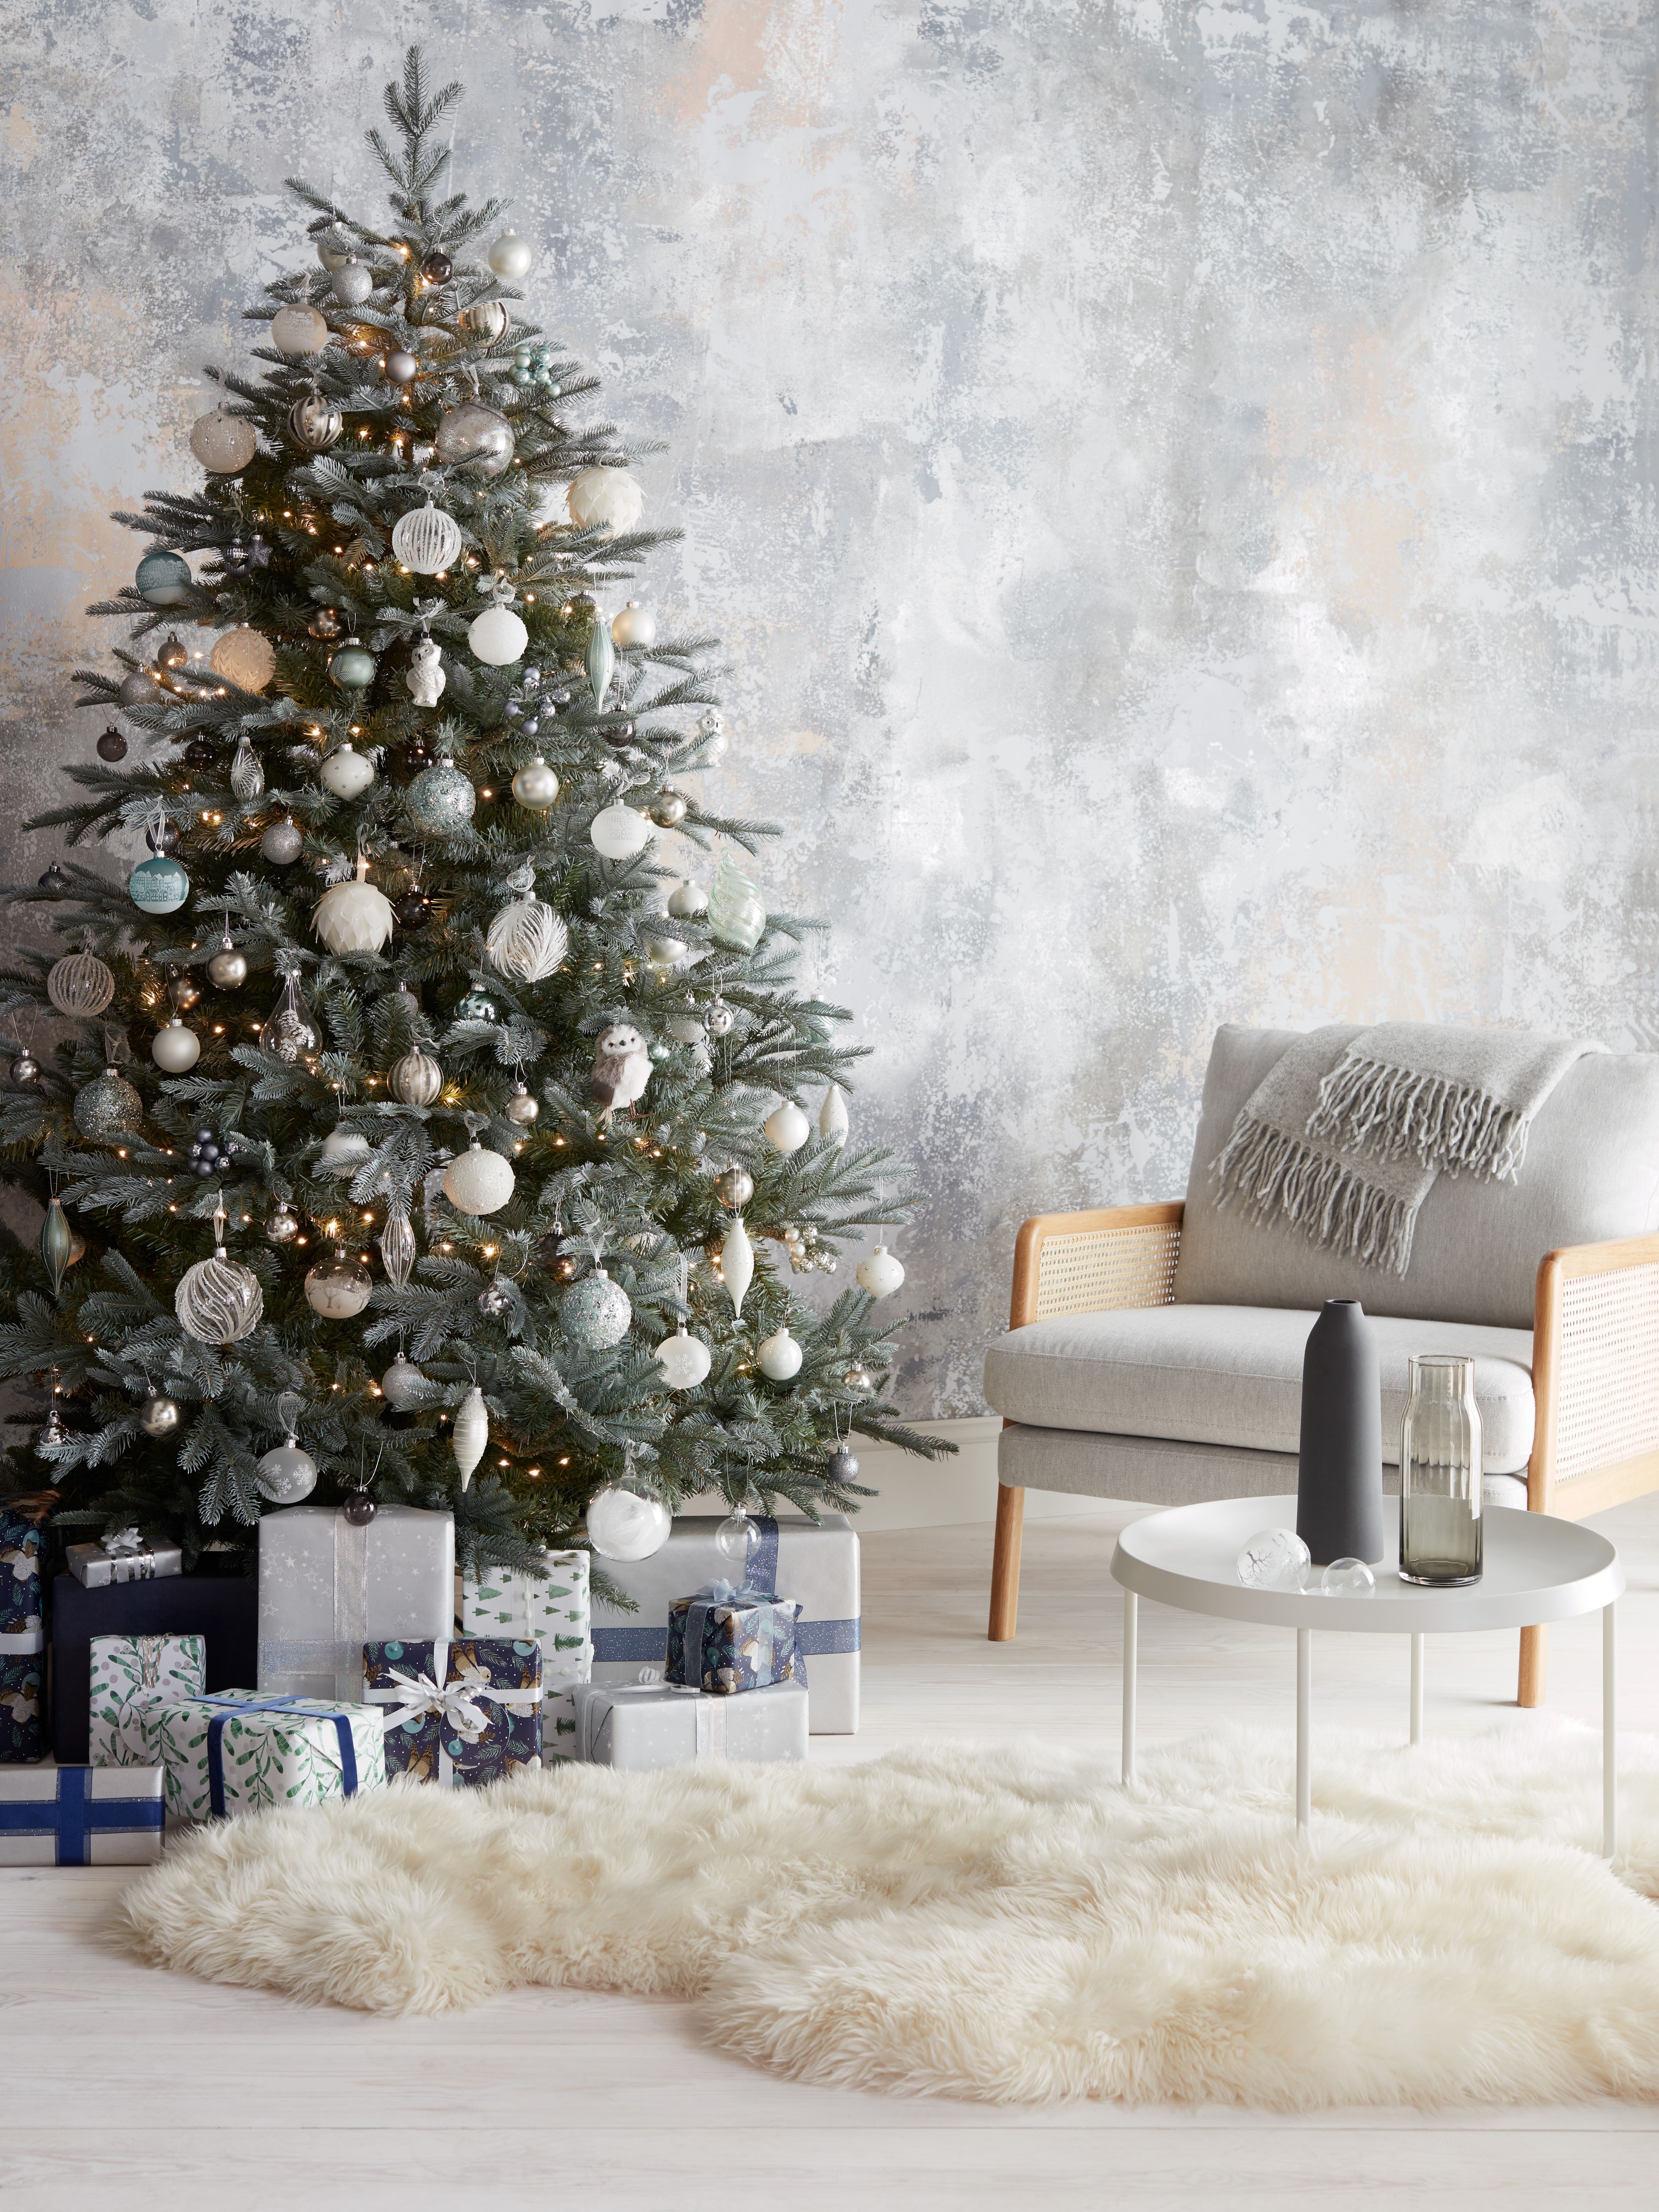 John Lewis 2019 Christmas Decorations And Themes Best Christmas